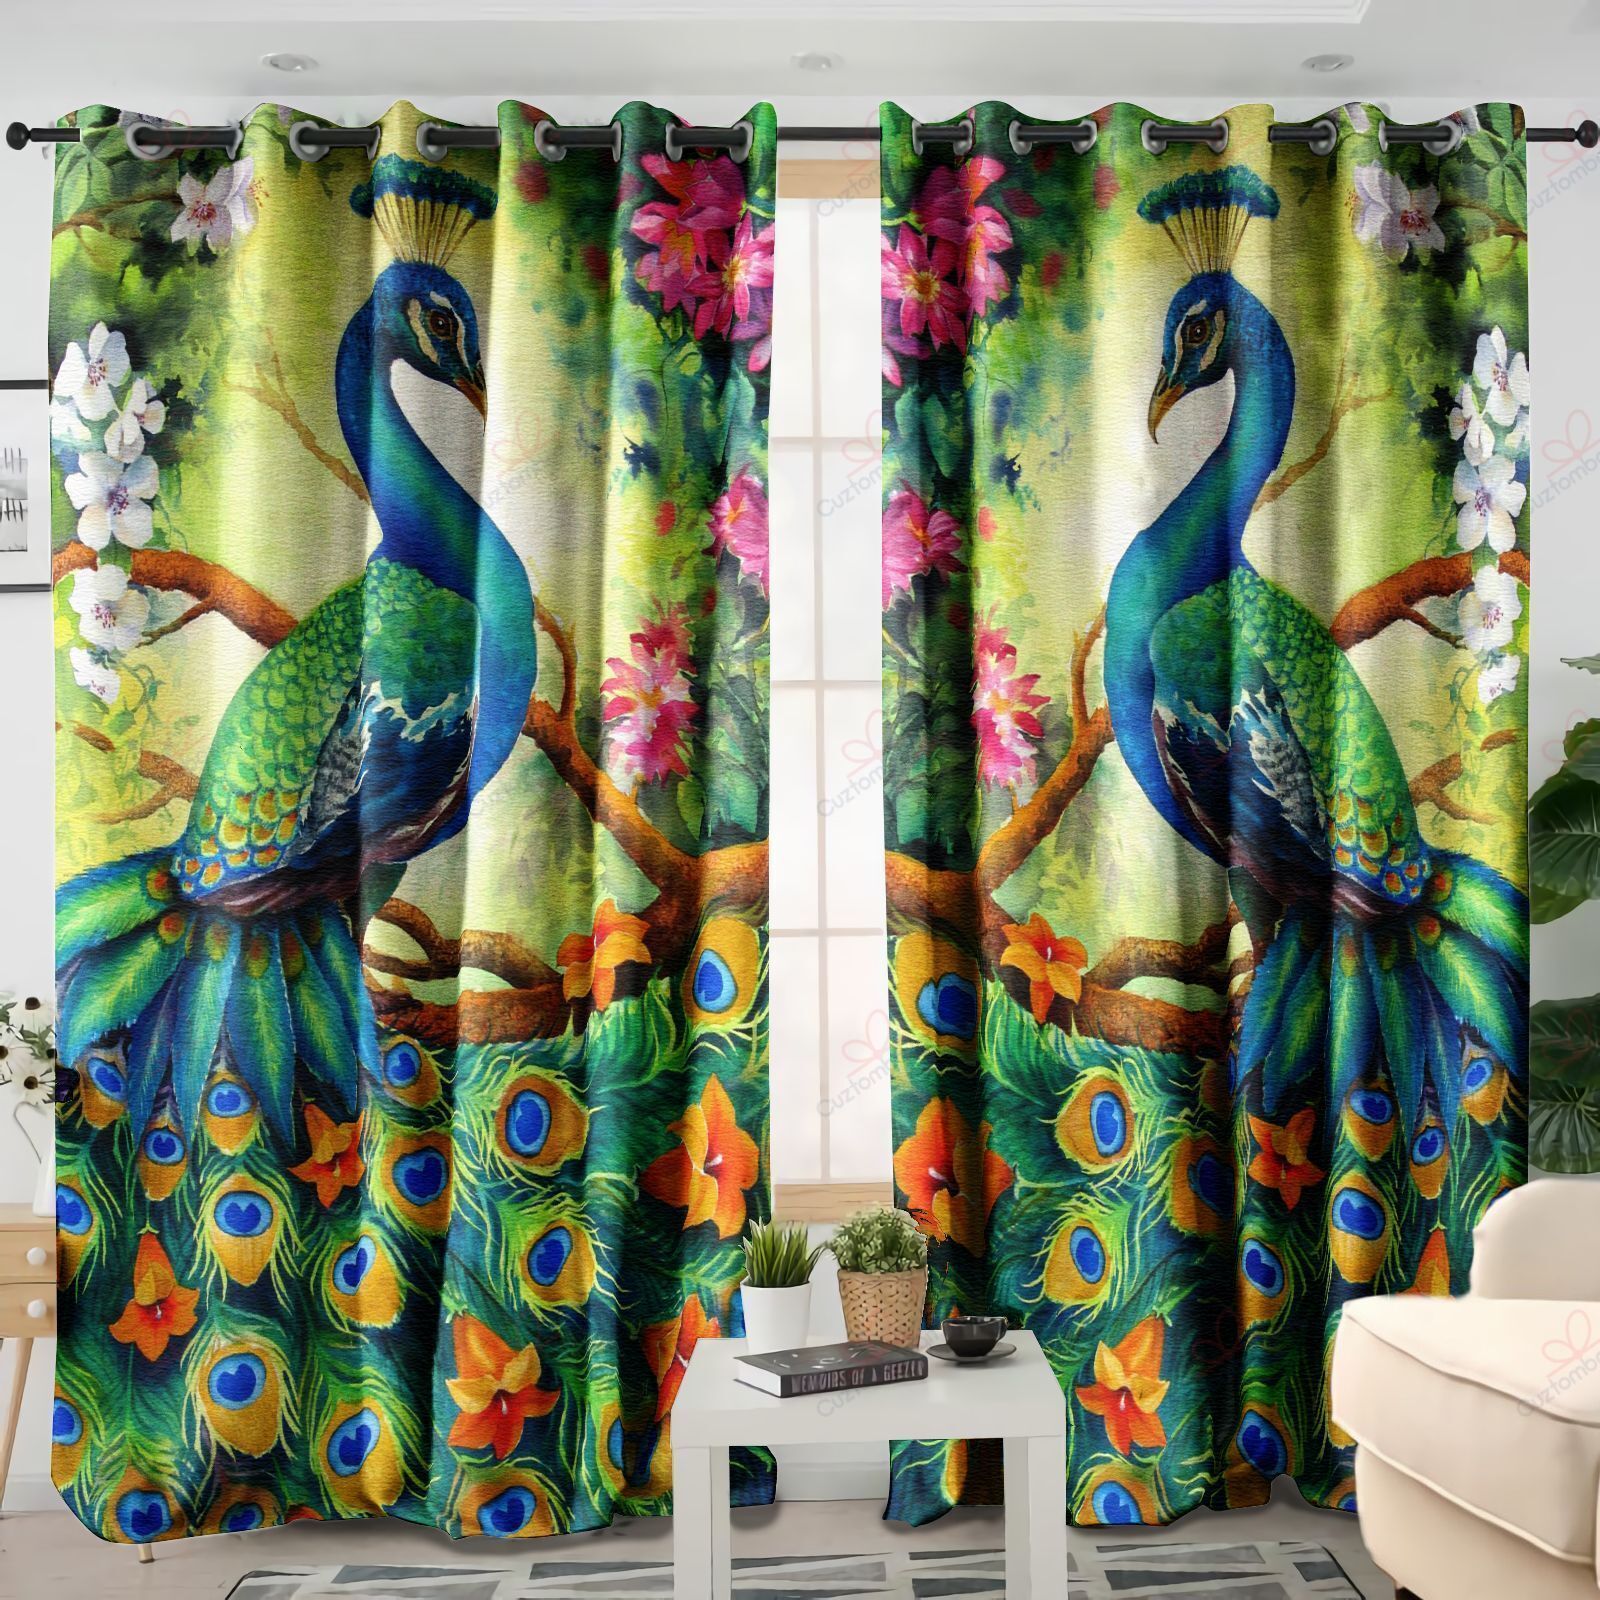 Peacock Into The Forest Printed Window Curtain Home Decor